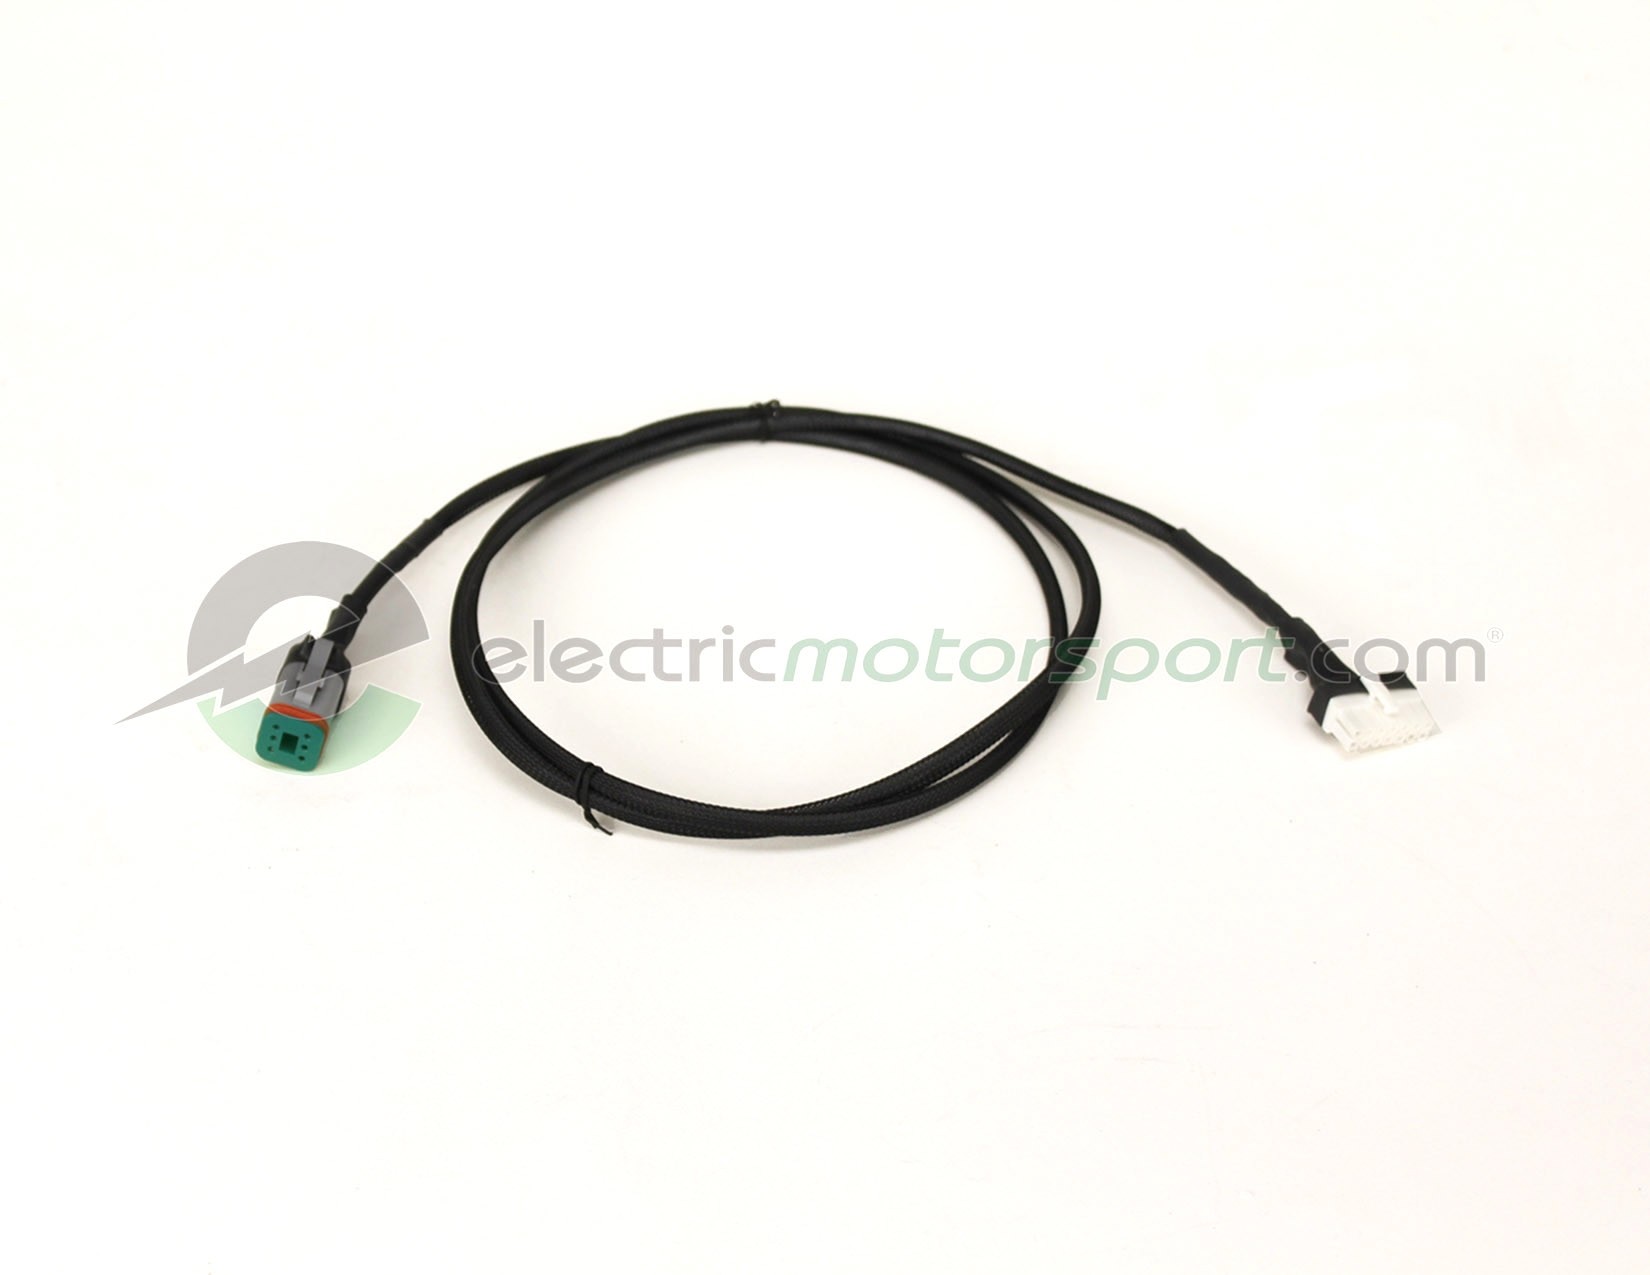 Native SHA3 Round Display CAN Cable